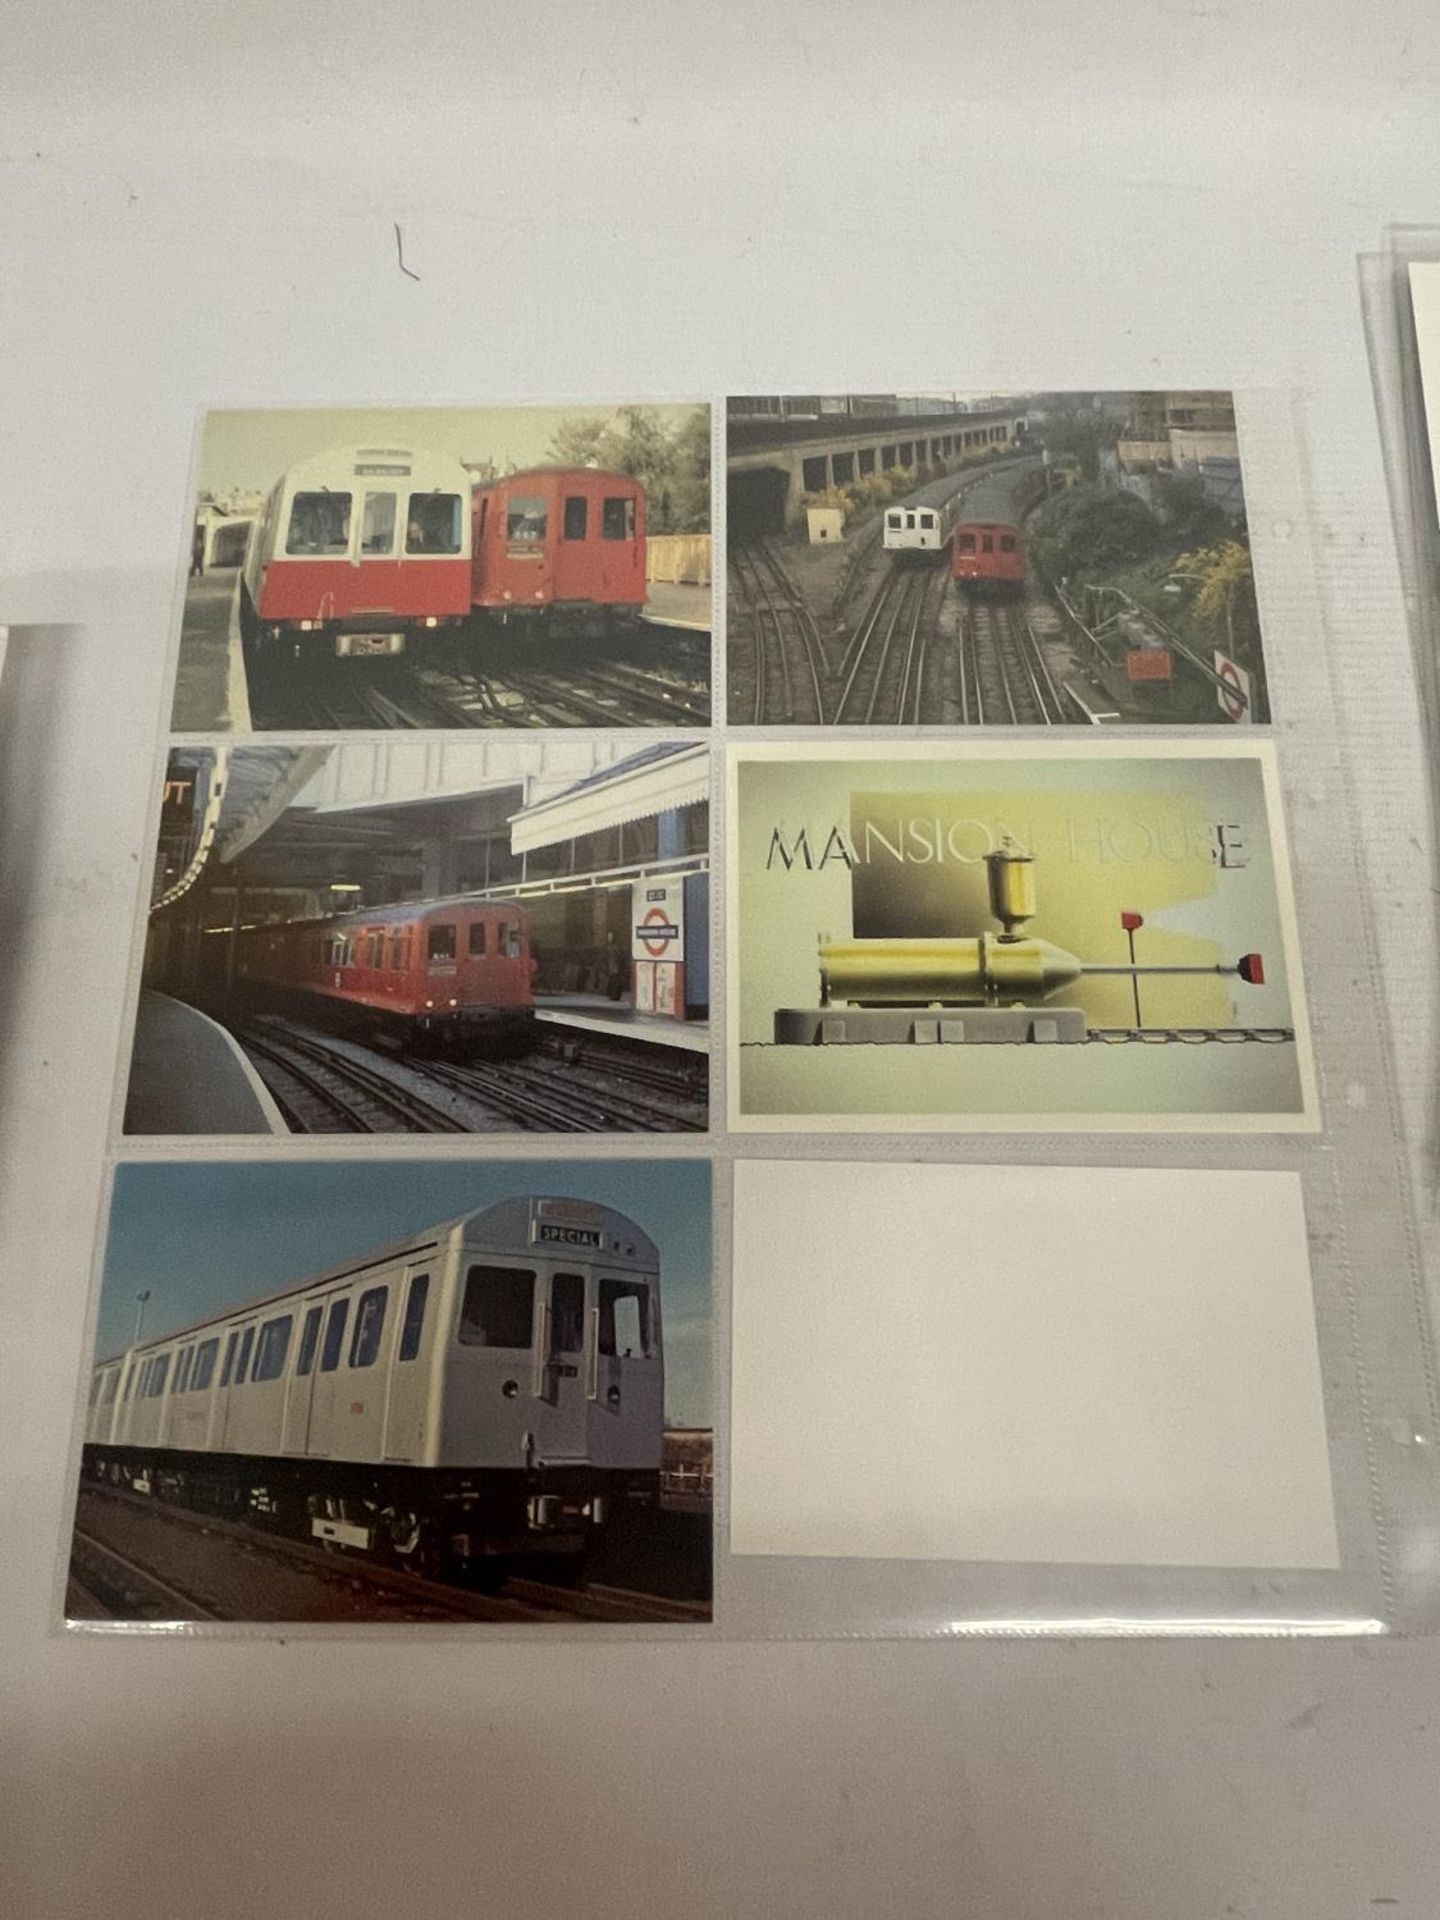 APPROXIMATELY 380 POSTCARDS RELATING TO BUSES, TRAMS, TROLLEY BUSES, UNDERGROUND,METROPOLITAN AND - Image 8 of 9